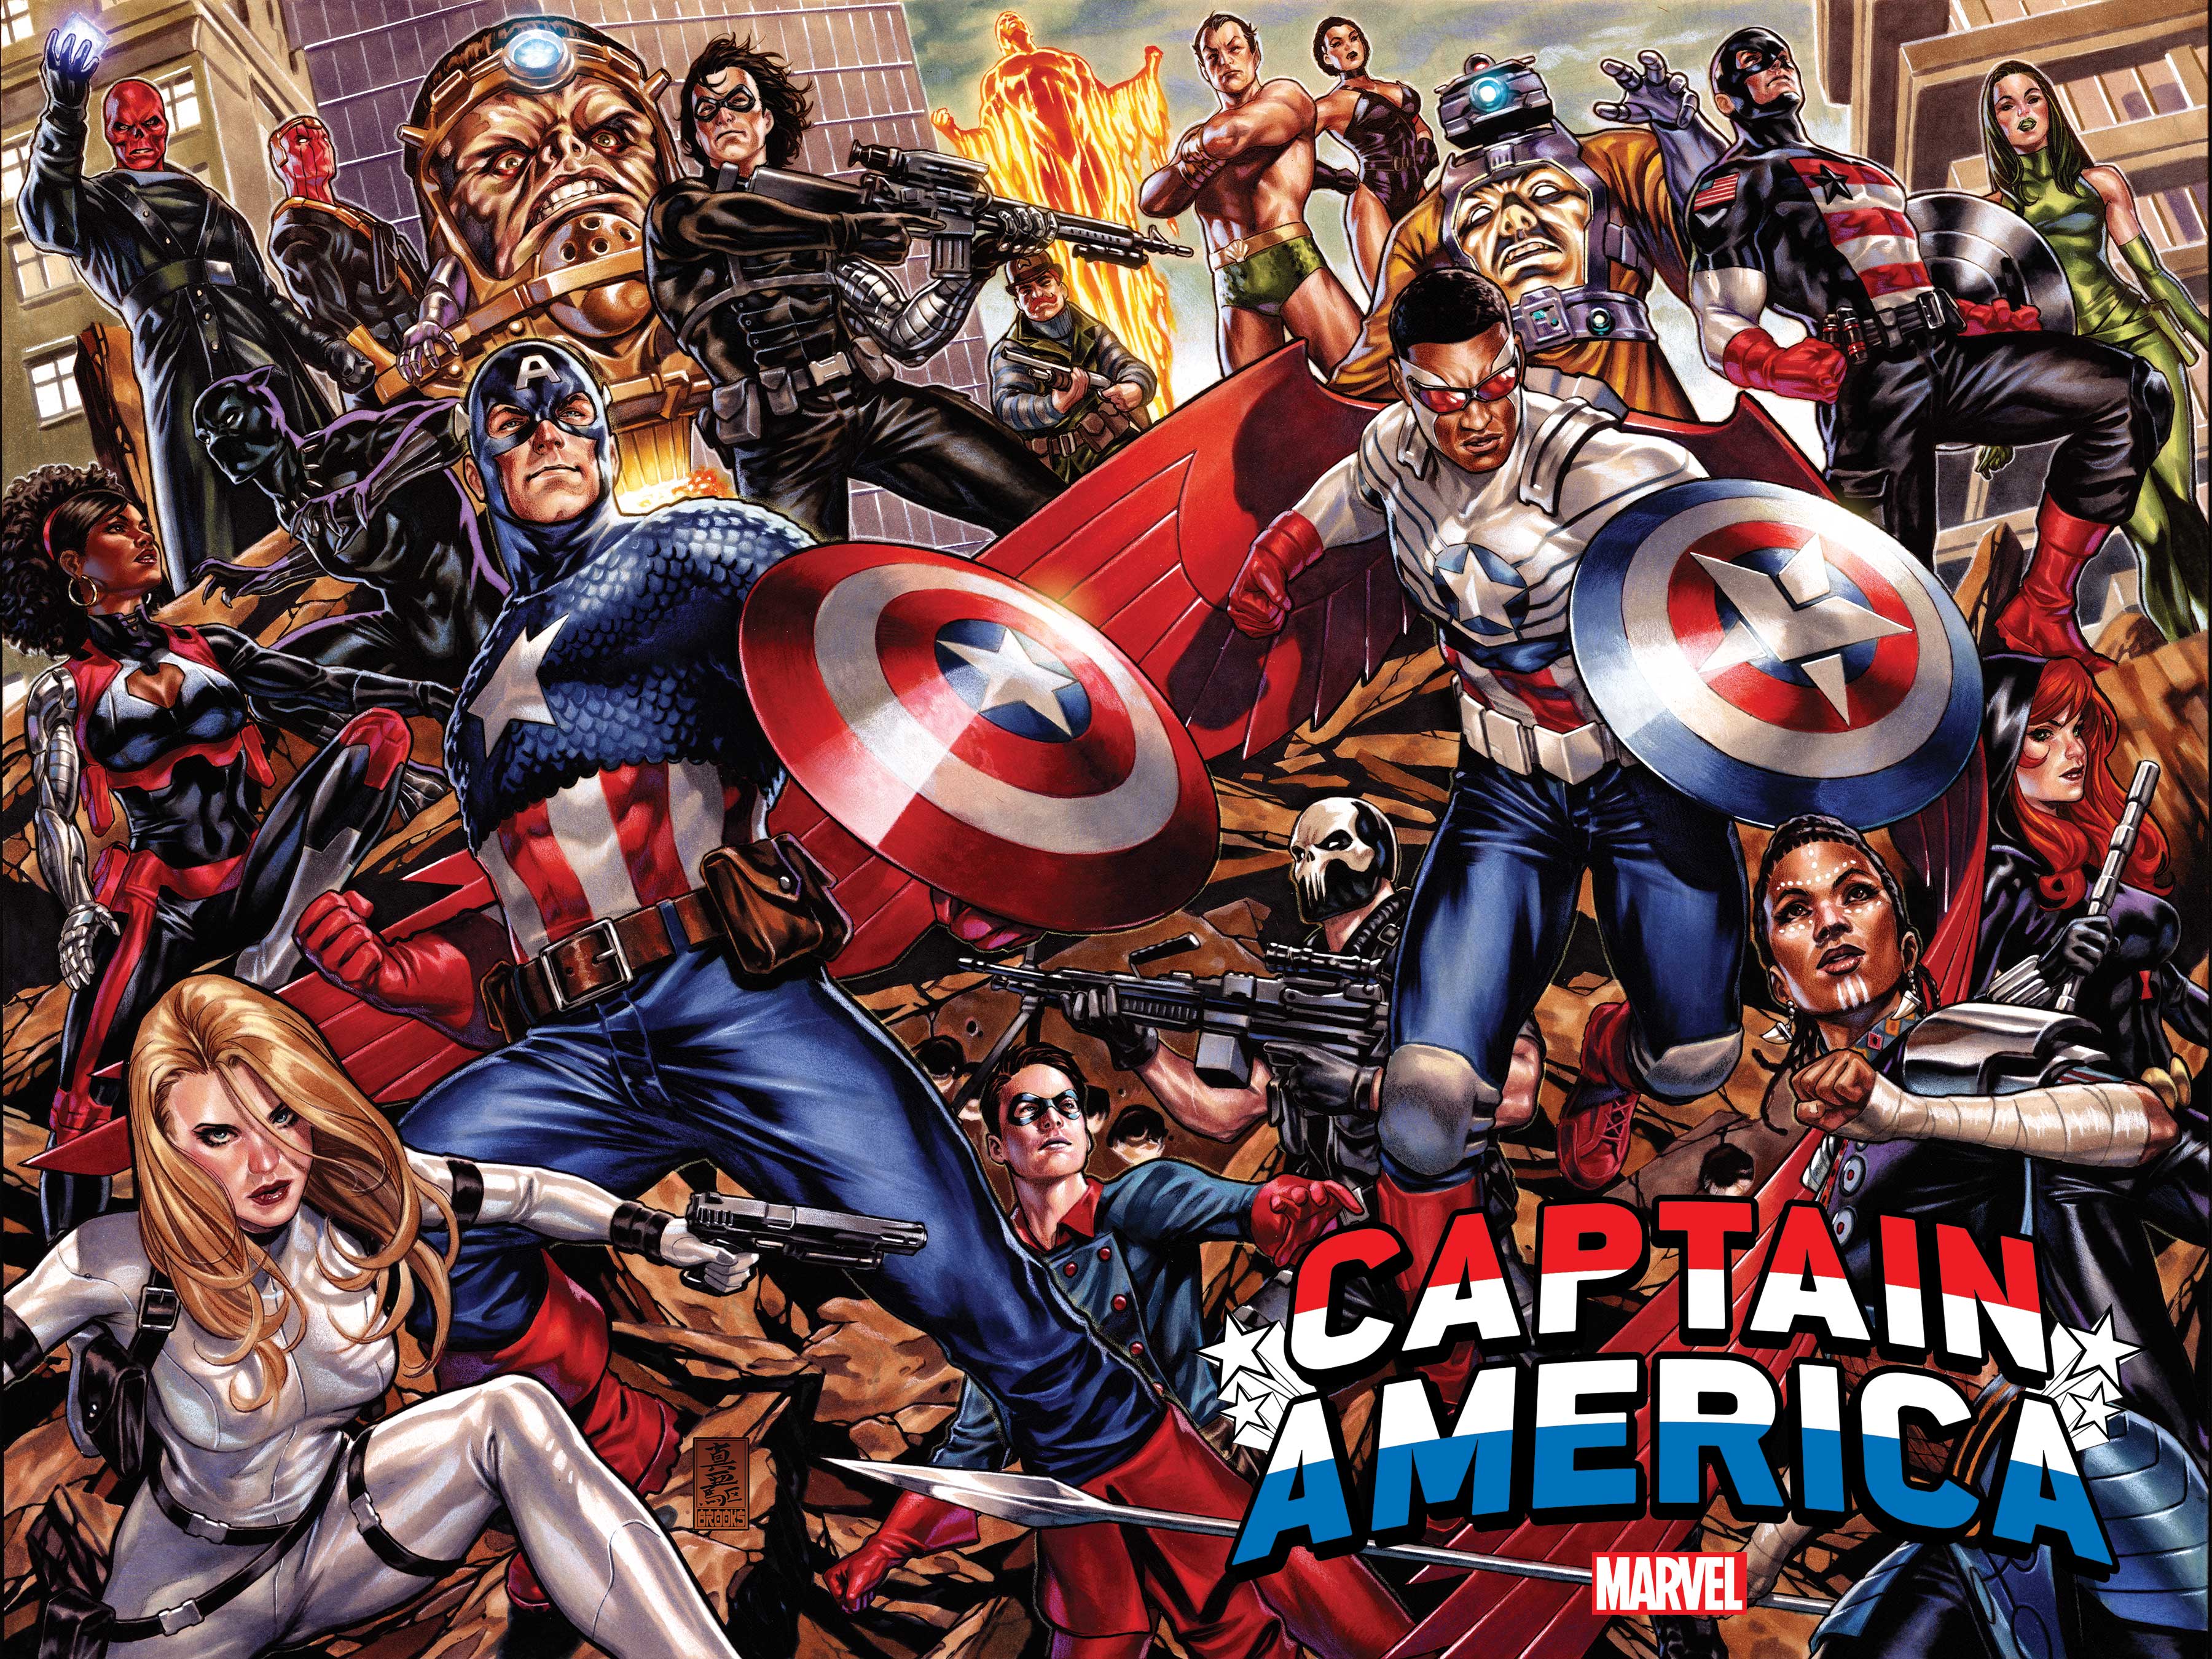 Captain America #0 will serve as springboard for 2 series | SYFY WIRE